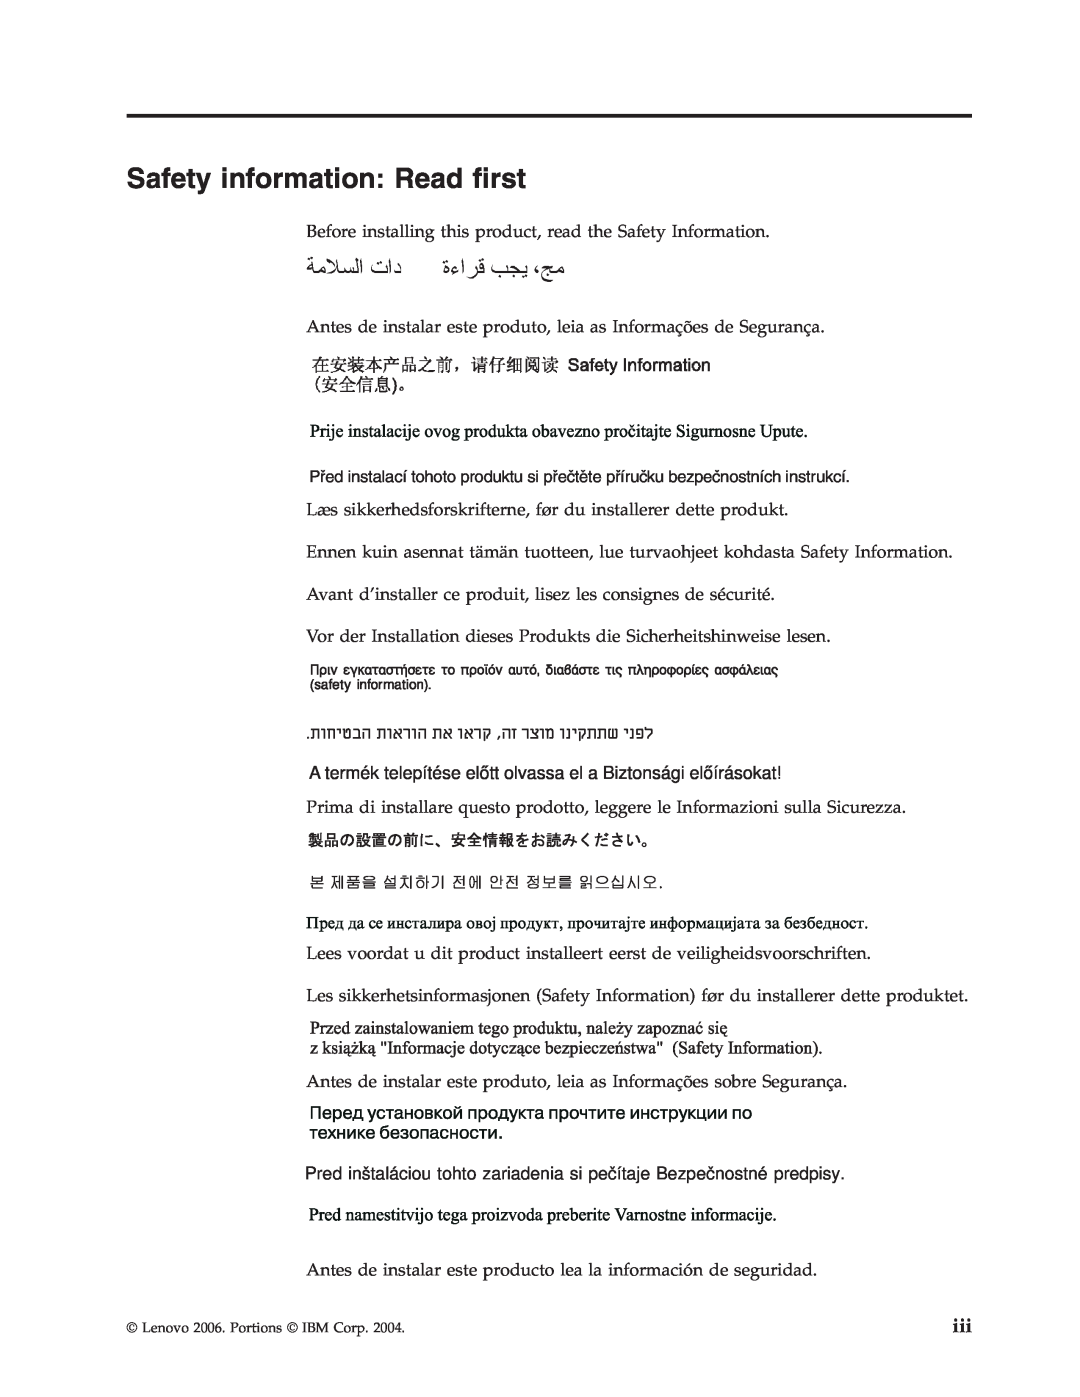 Lenovo 41N5624 manual Safety information: Read first, Lenovo 2006. Portions IBM Corp 